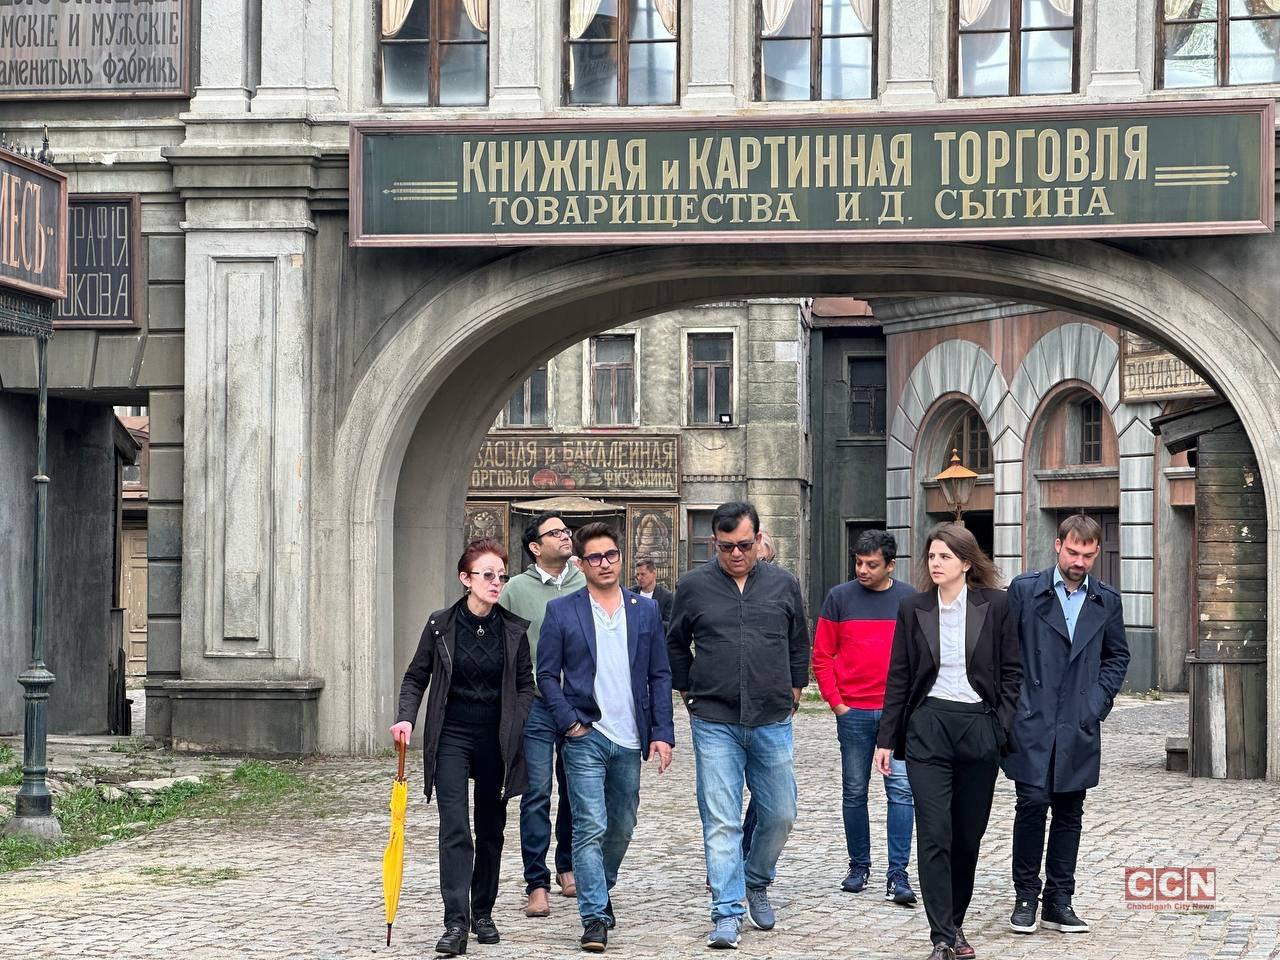 Indian filmmakers impressed by filming locations in Russia